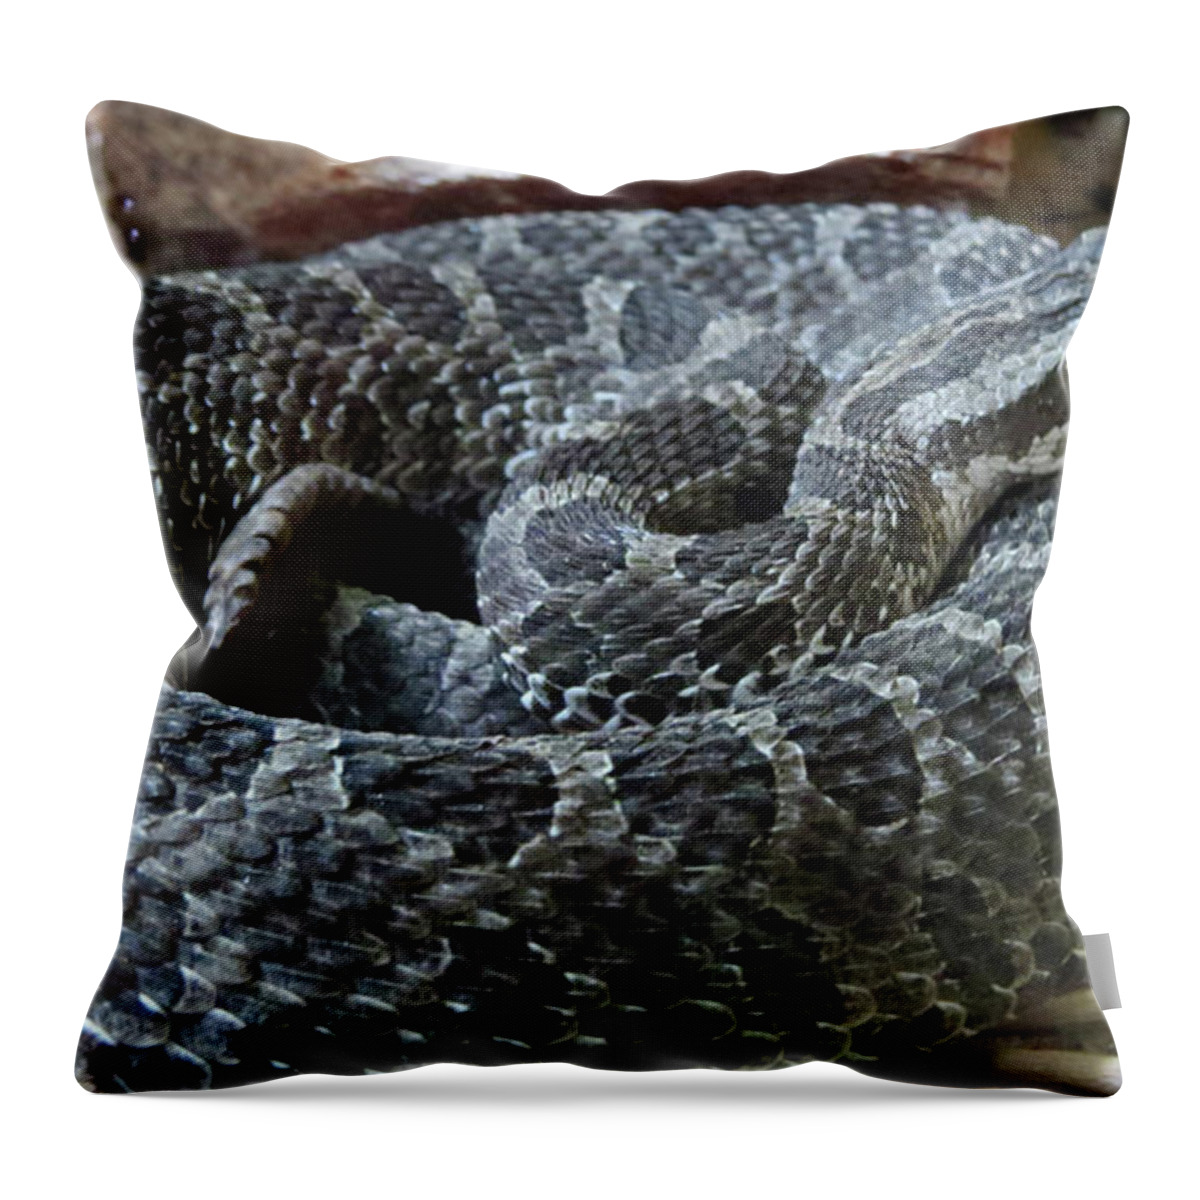 Snakes Throw Pillow featuring the photograph Coiled by Mary Mikawoz